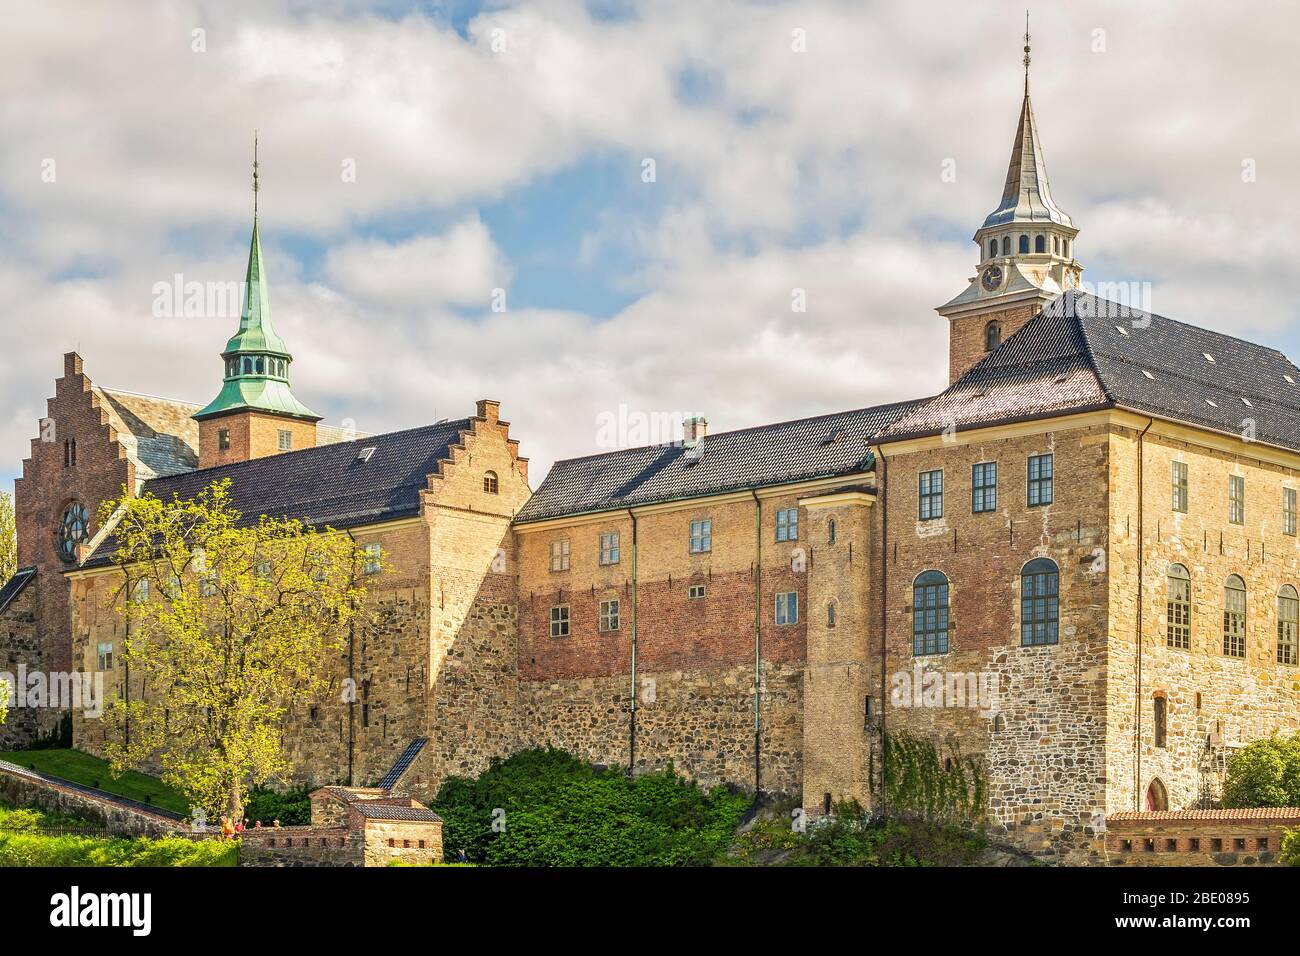 The Fortress Of Akershus Viewed From The Sea  Oslo Norway Stock Photo